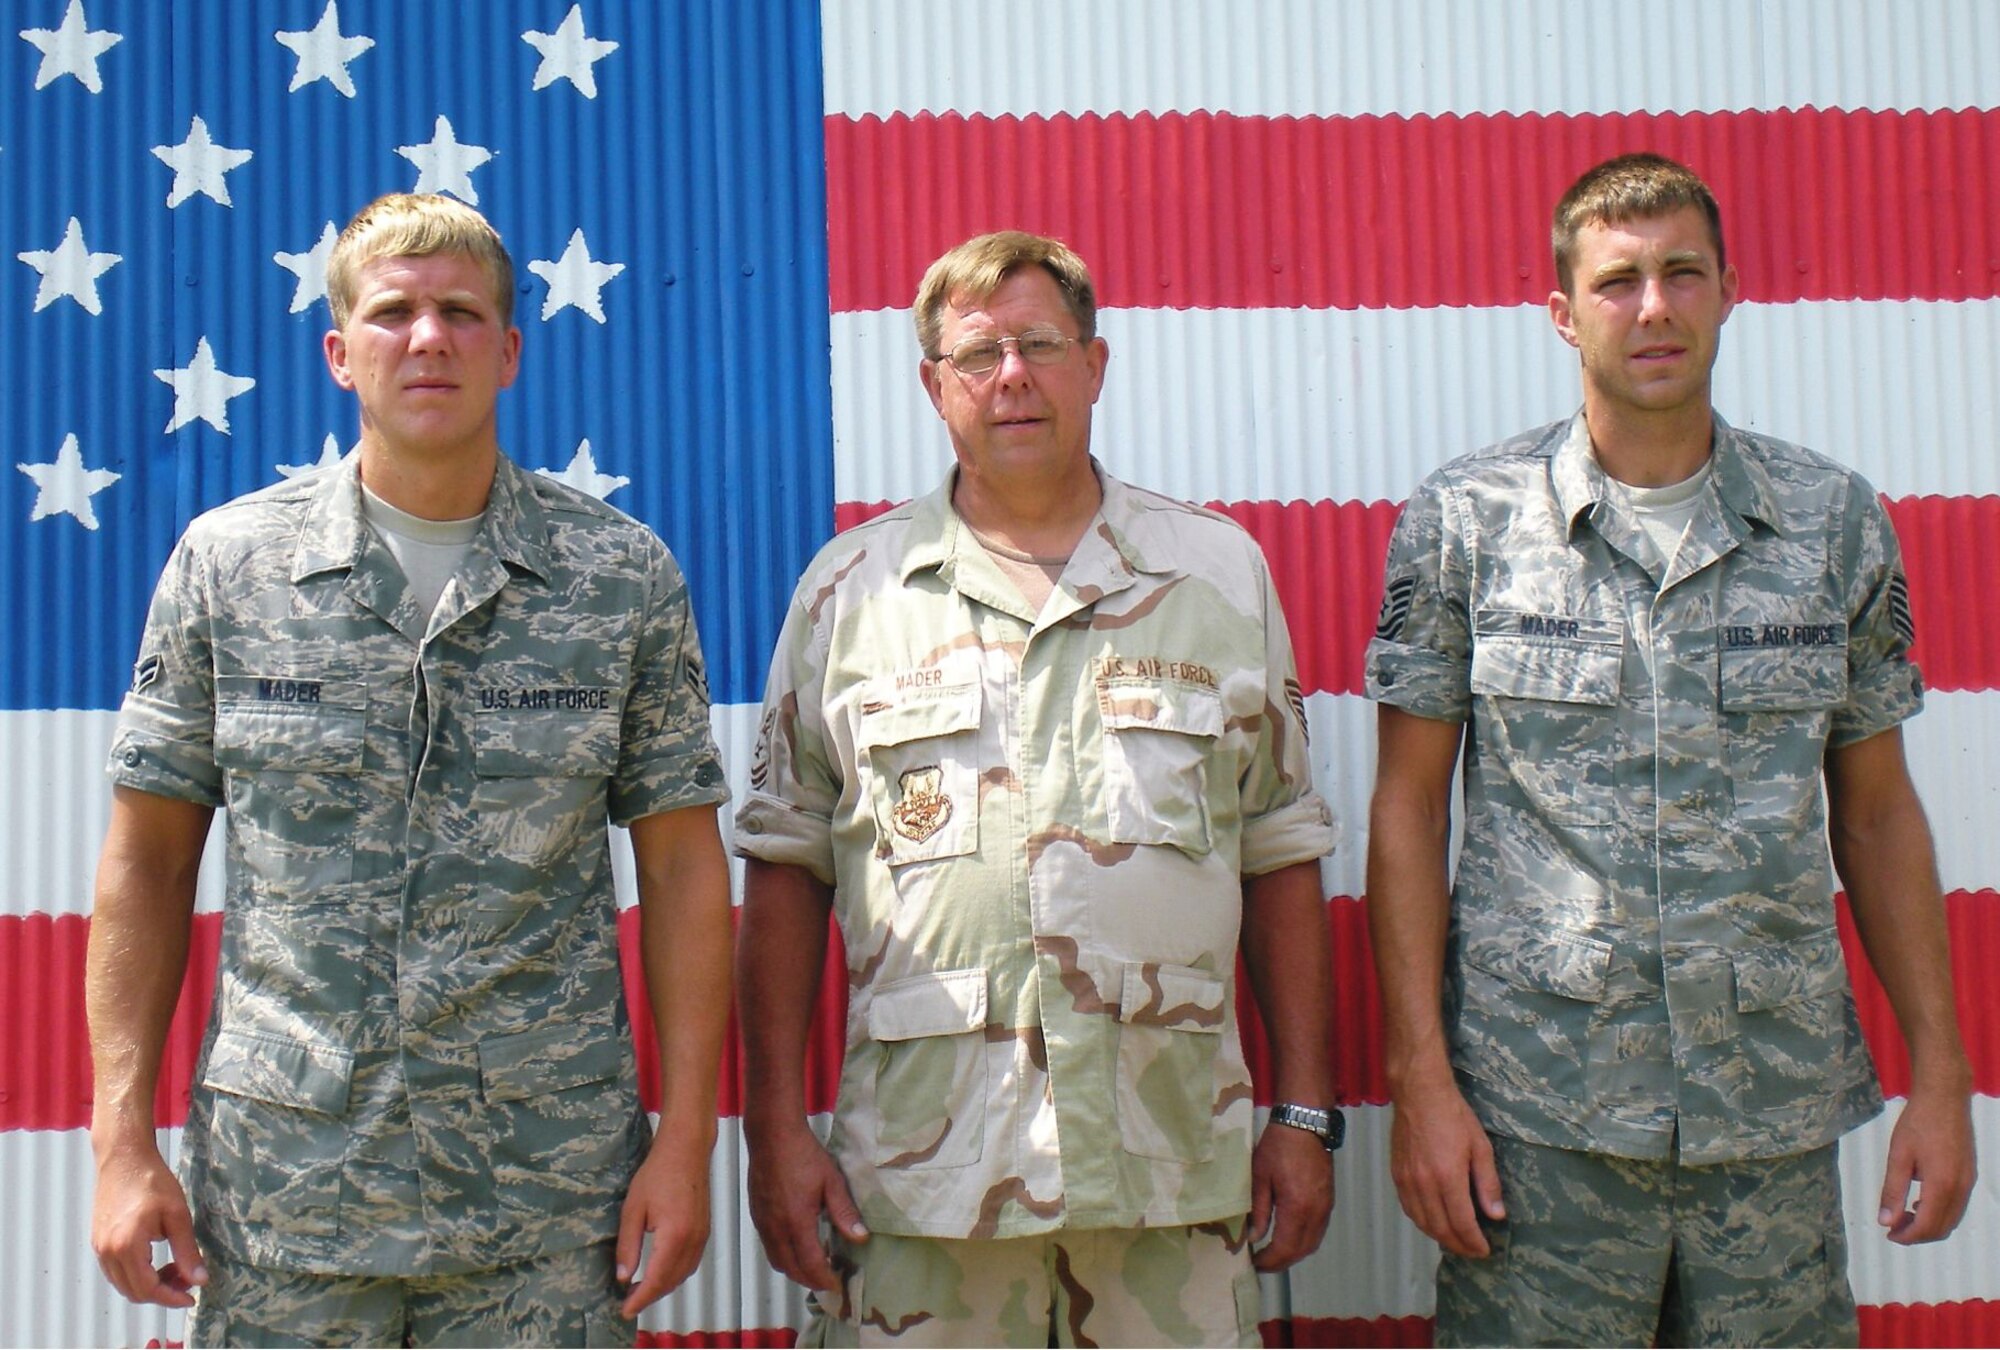 These Three members of the Mader family are members of the Iowa Air National Guard and all of them were overseas at the same time this summer, in the front lines of the war against terror. From left are Airman 1st Class Anthony Mader, of Ames: Tech Sgt. William Madder, o Fort Dodge; and Tech Sgt. Benjamin madder of Nevada. Anthony and Benjamin are members of the 132nd fighter Wing. Their father, William is a member of the 185th Air Refueling Wing.